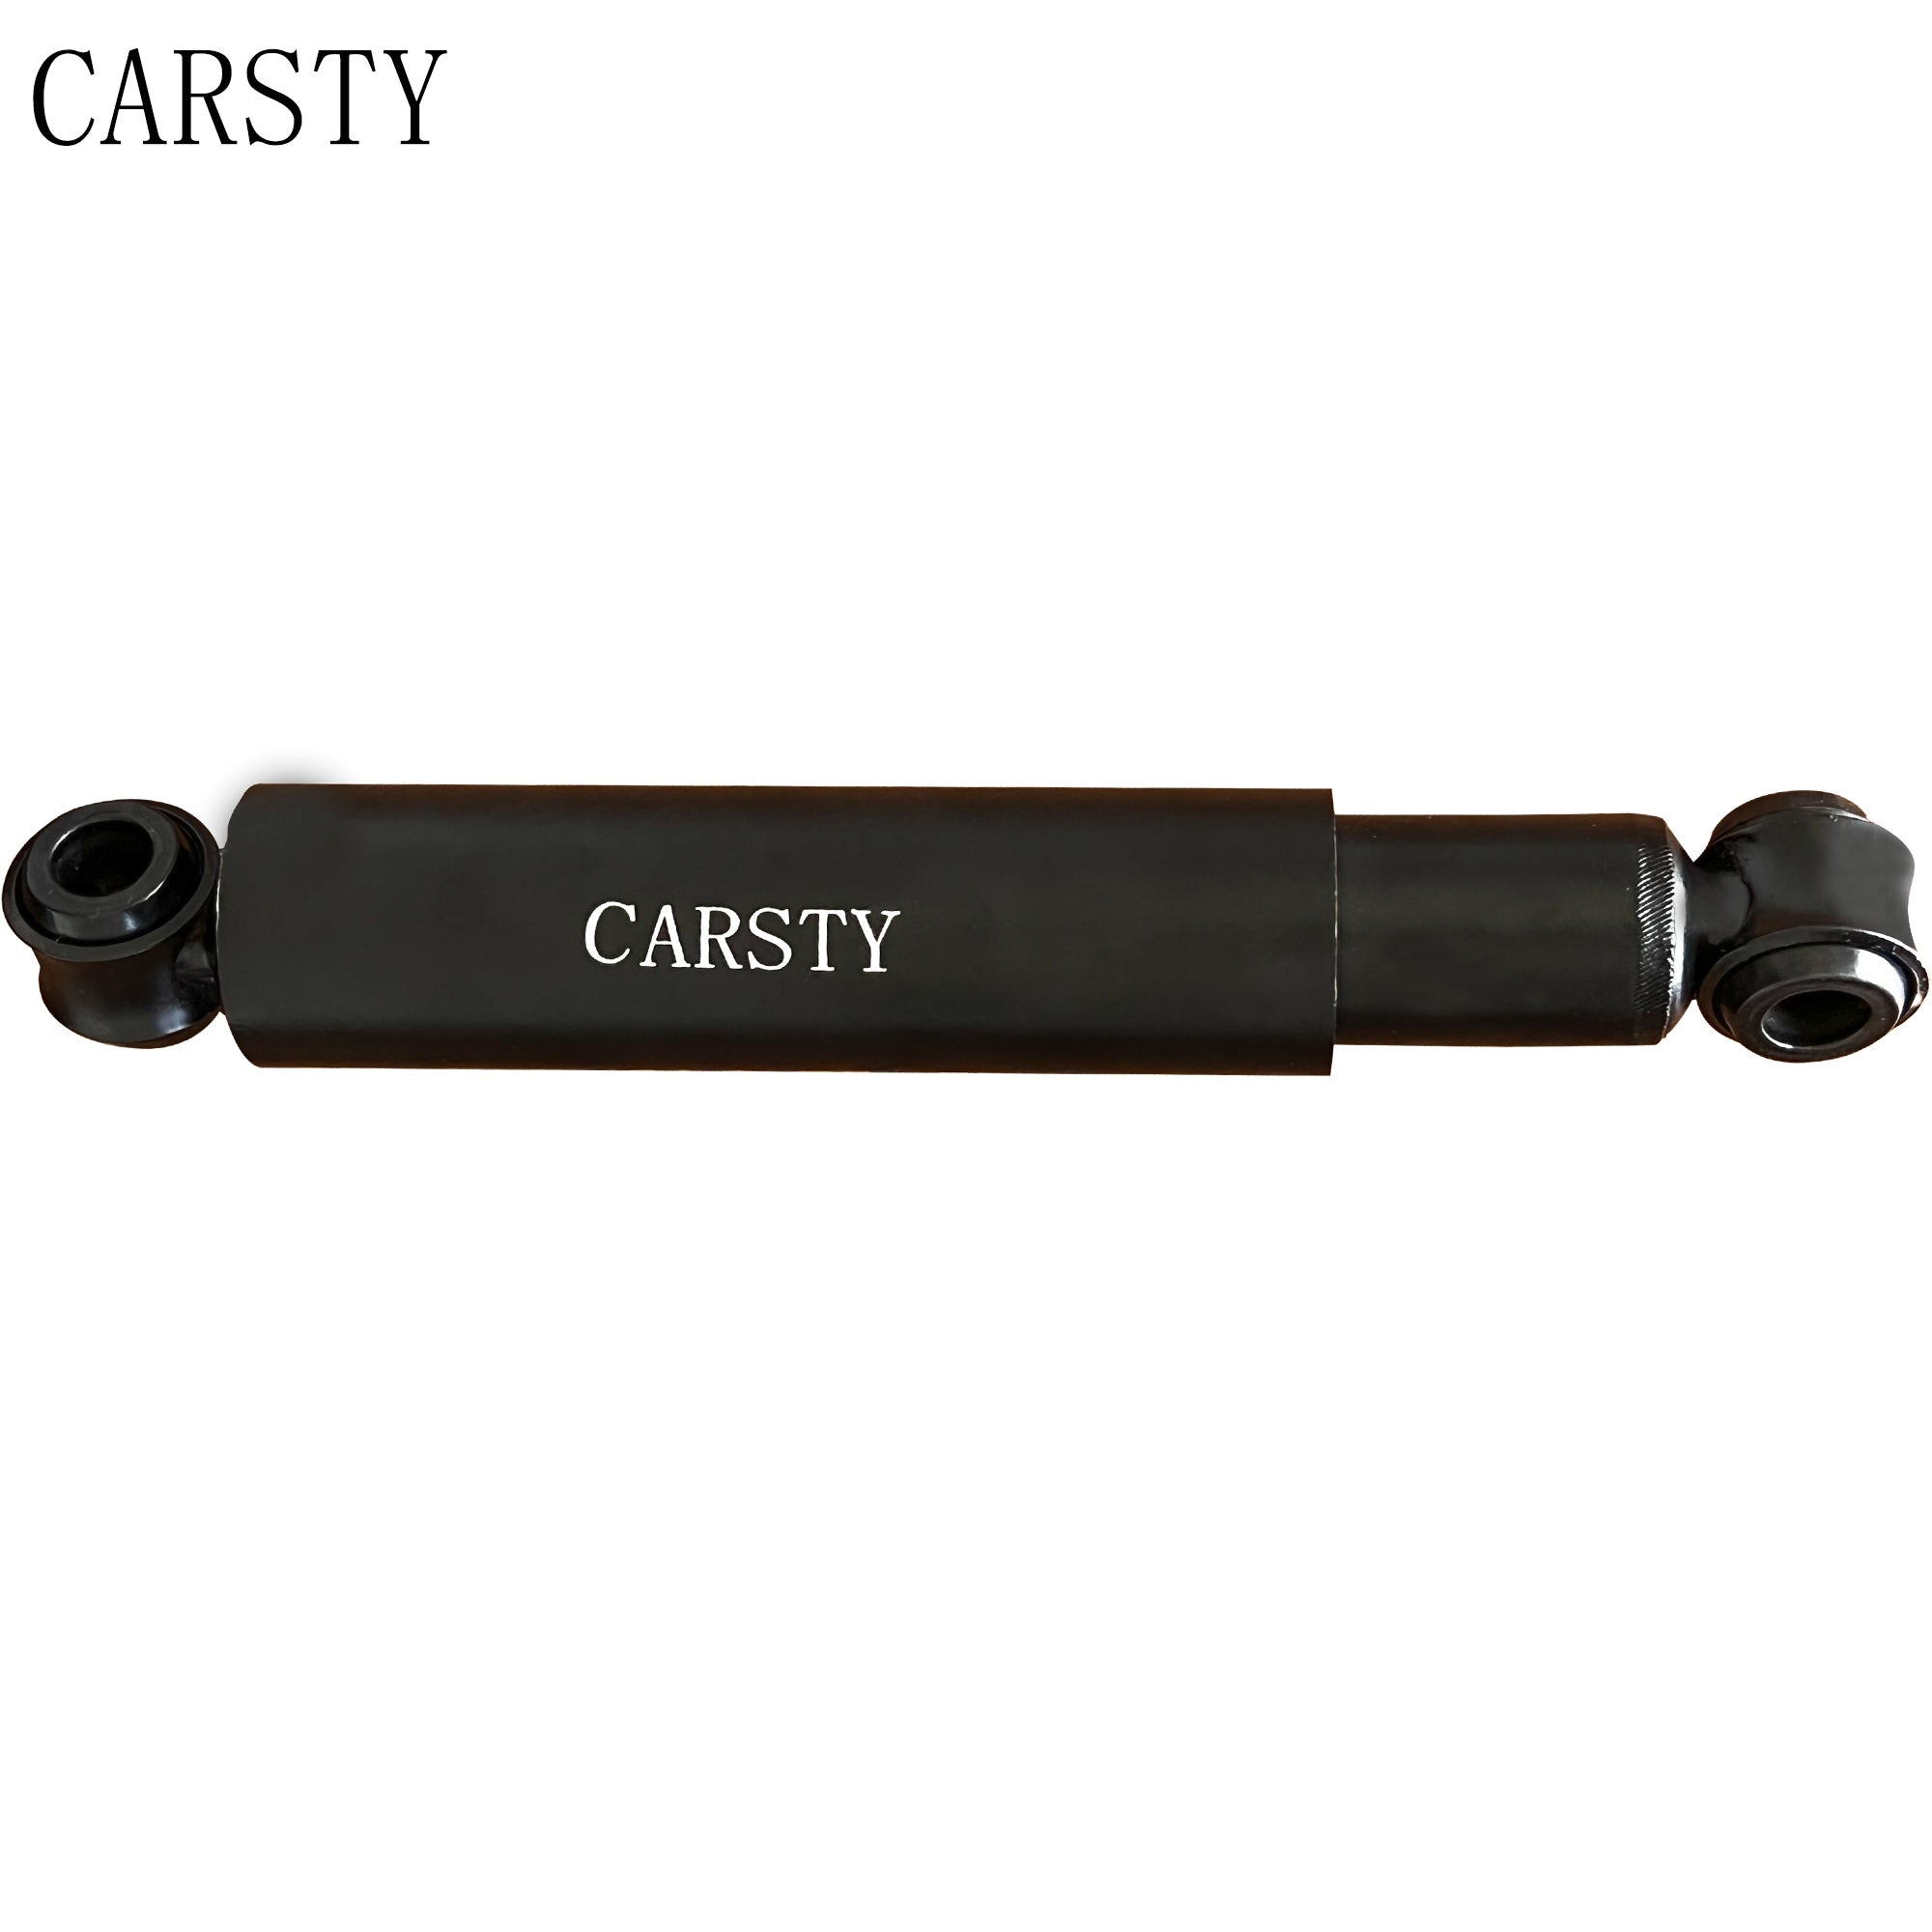 CARSTY High Temperature Resistance of Shock Absorber Hose of Vehicle Suspension System